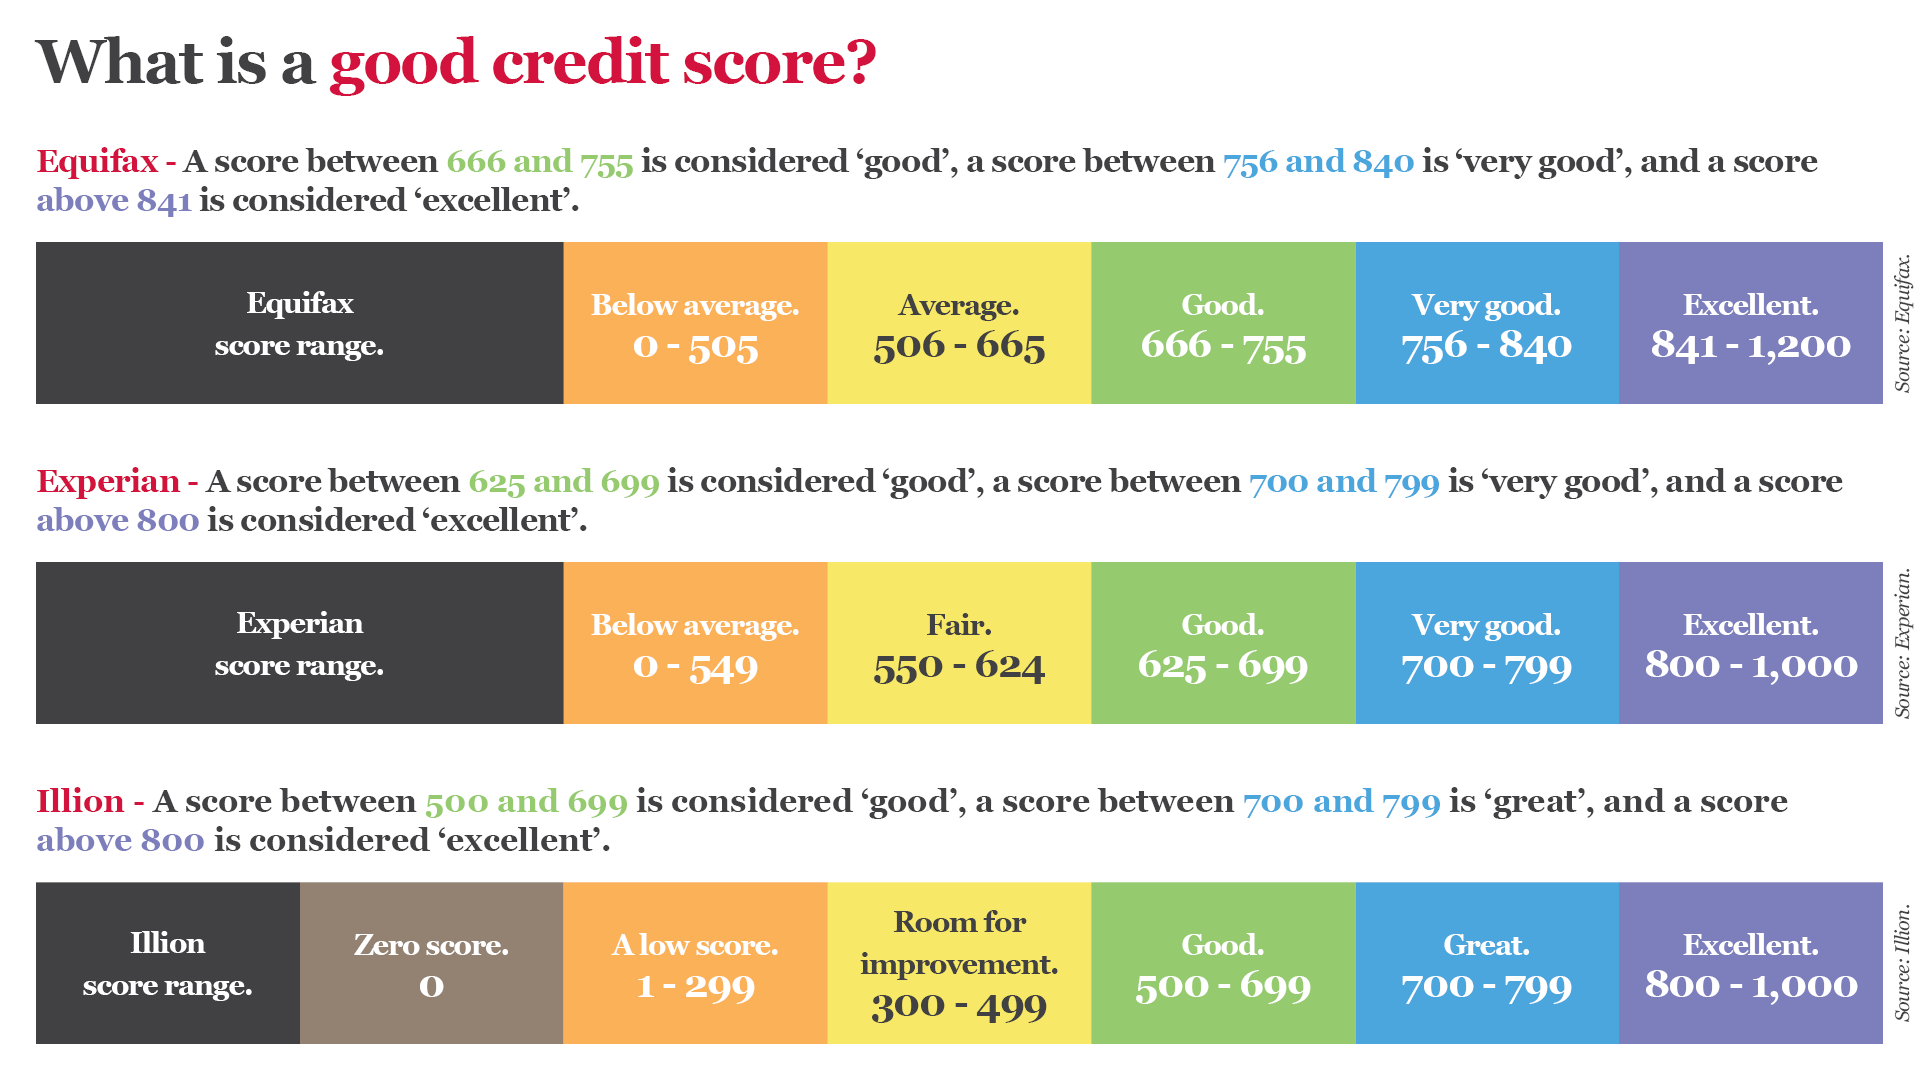 CAM00512_WhatIsAGoodCreditScore_ArticleInfoGraphic_May2021.png